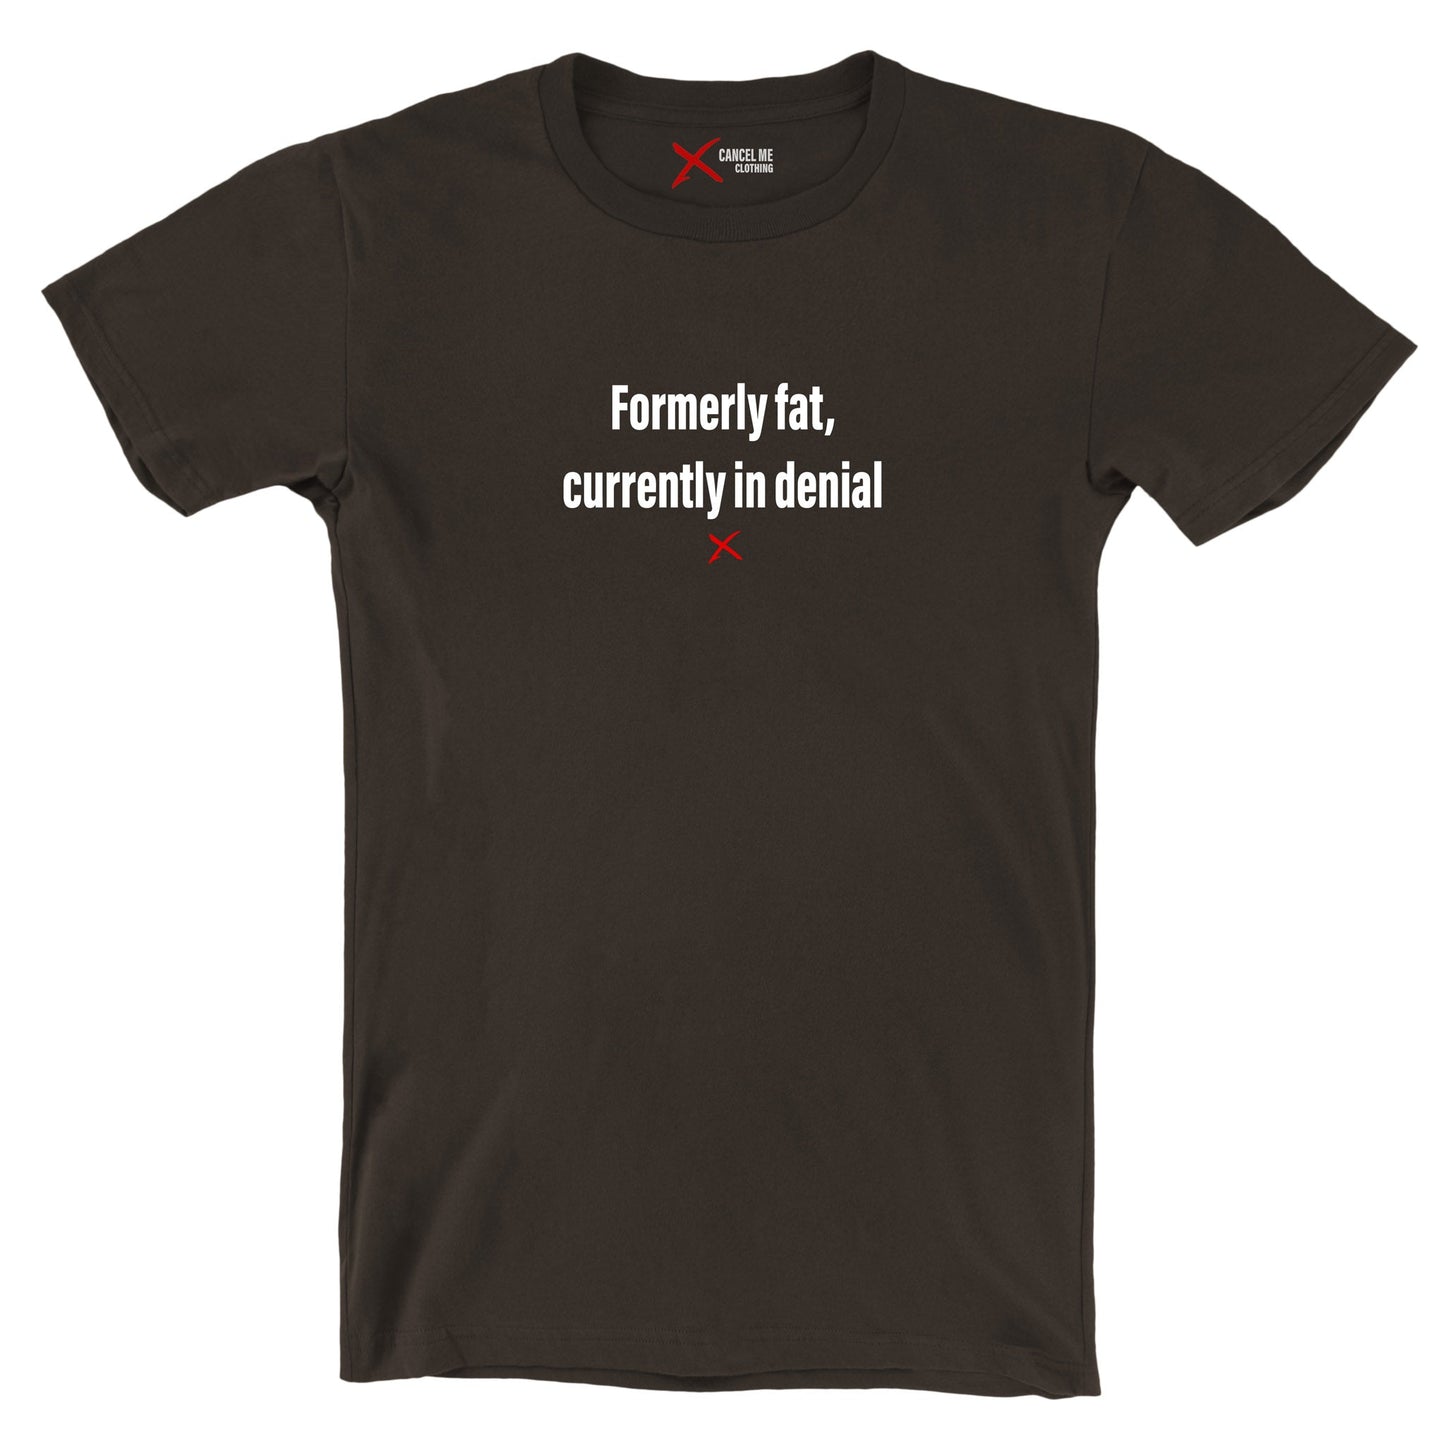 Formerly fat, currently in denial - Shirt